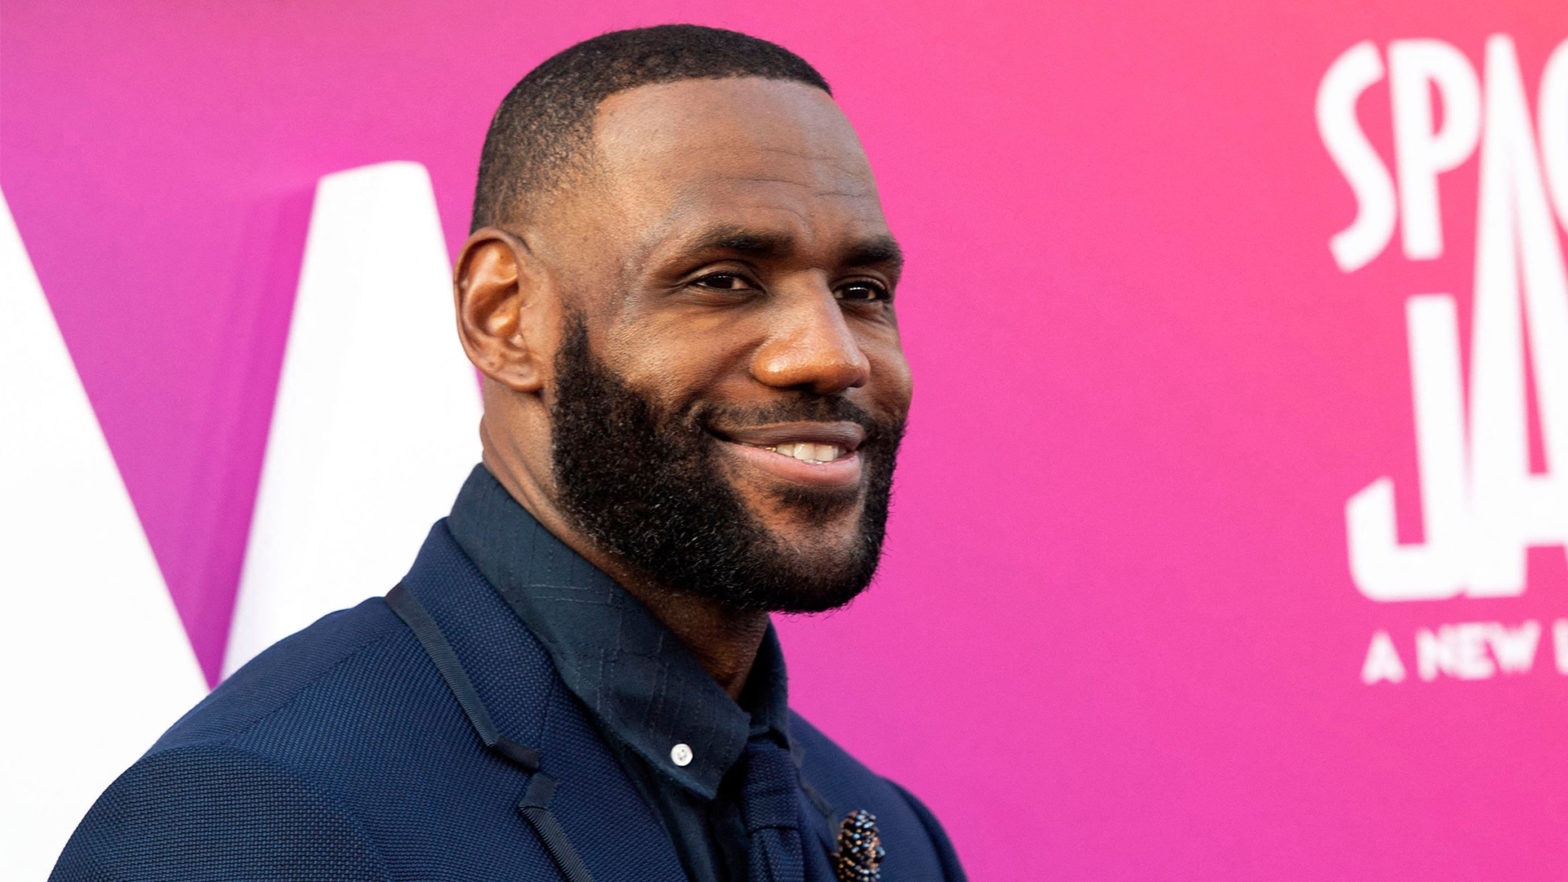 LeBron James Family Foundation And Box Tops For Education Launch Campaign To Advance Racial Equity In Education